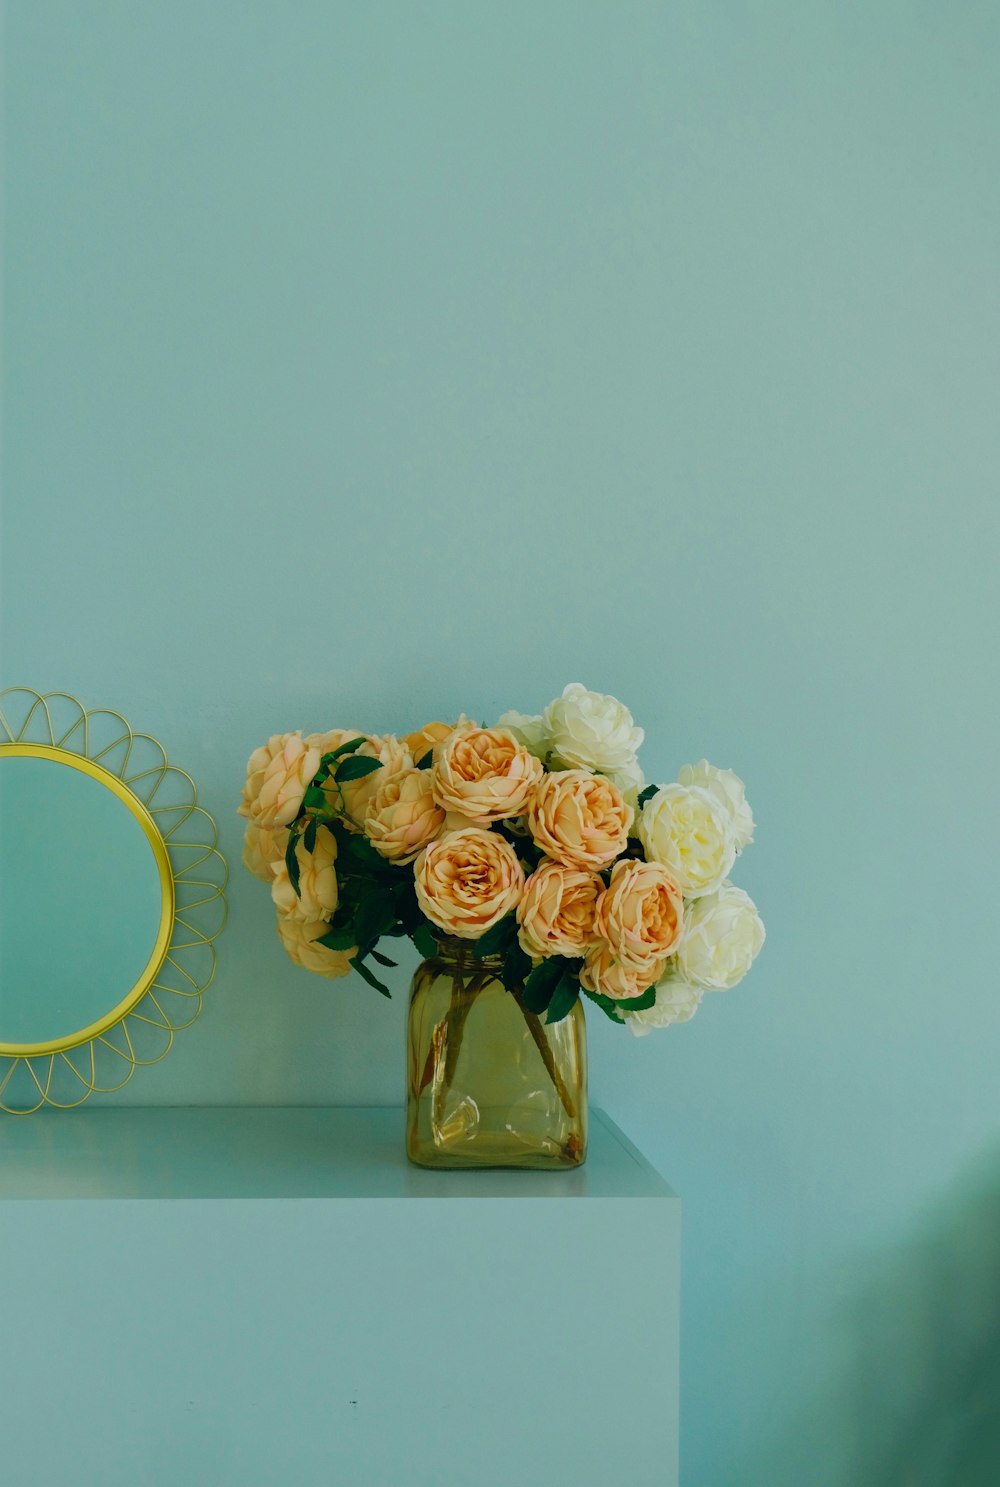 a vase filled with flowers next to a mirror